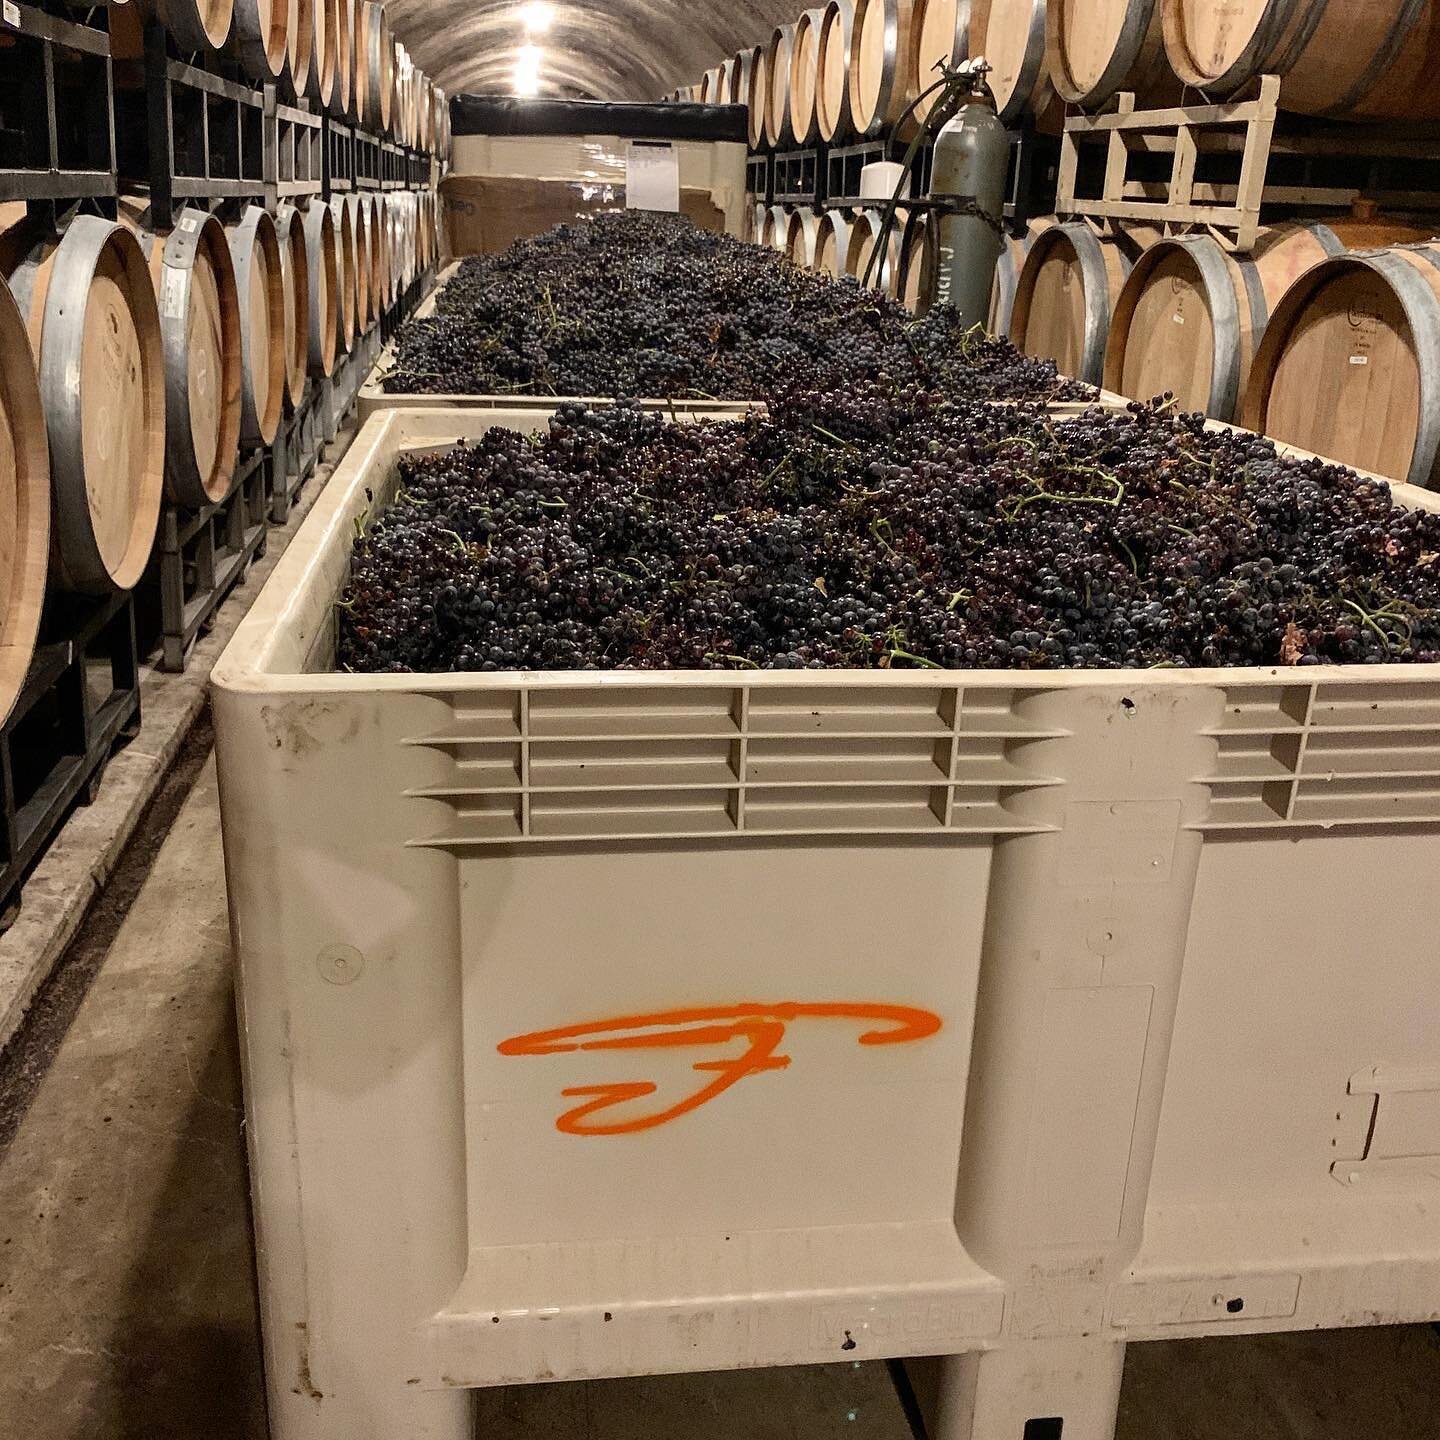 Harvest 2022: Cab Pfeffer patiently awaiting processing in the cave #cabpfeffer #harvest2022